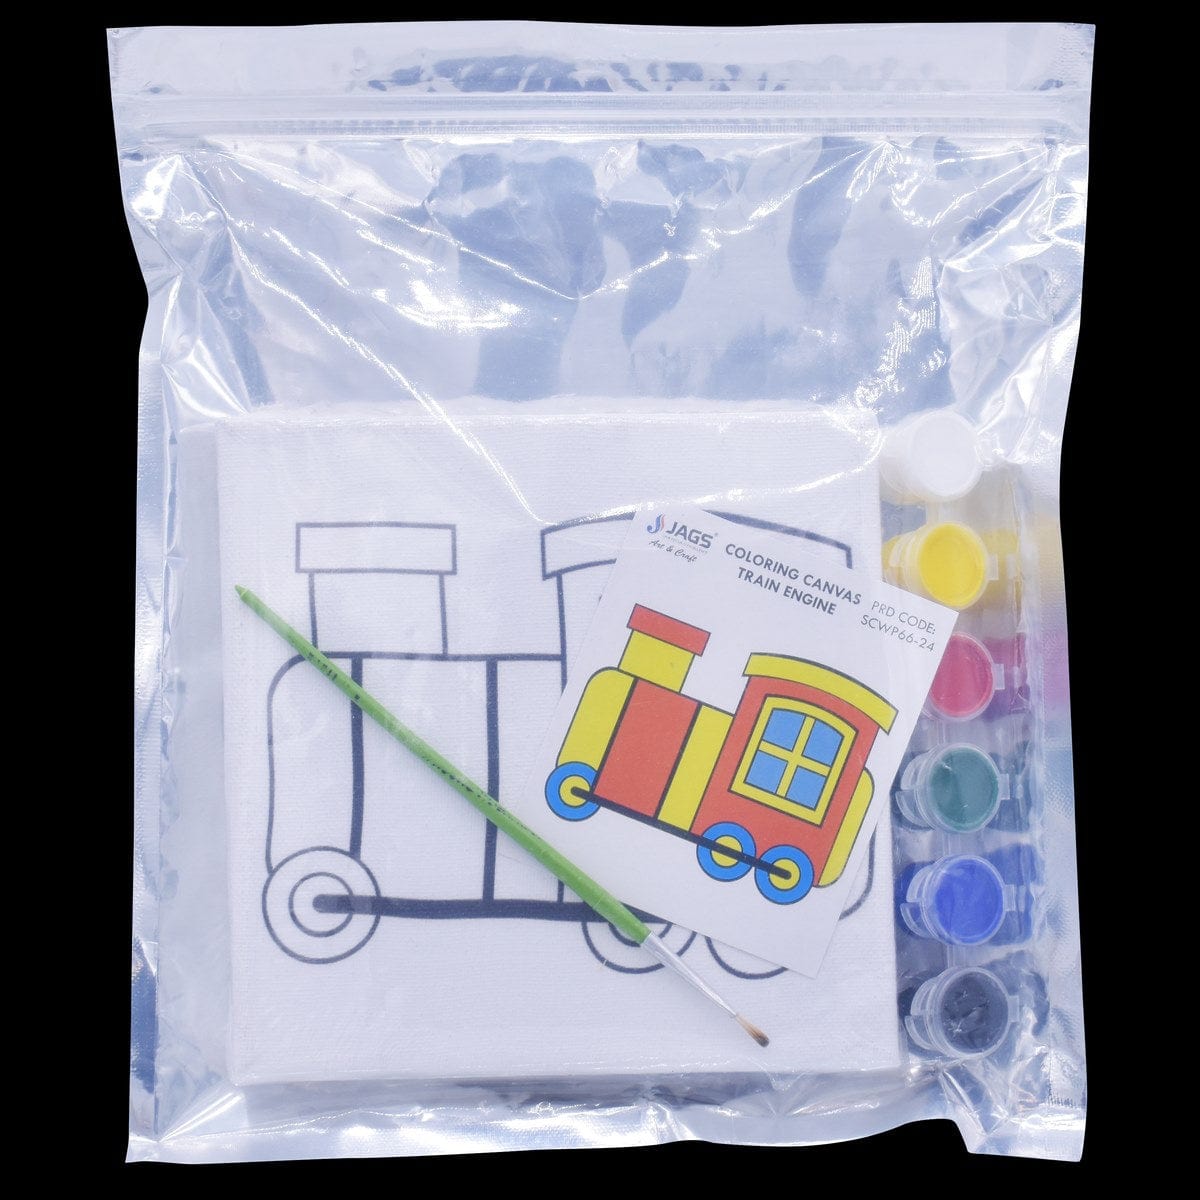 jags-mumbai Canvas DIY Painting Kit: Stretched Canvas with Pre-drawn Pictures and Free Colors